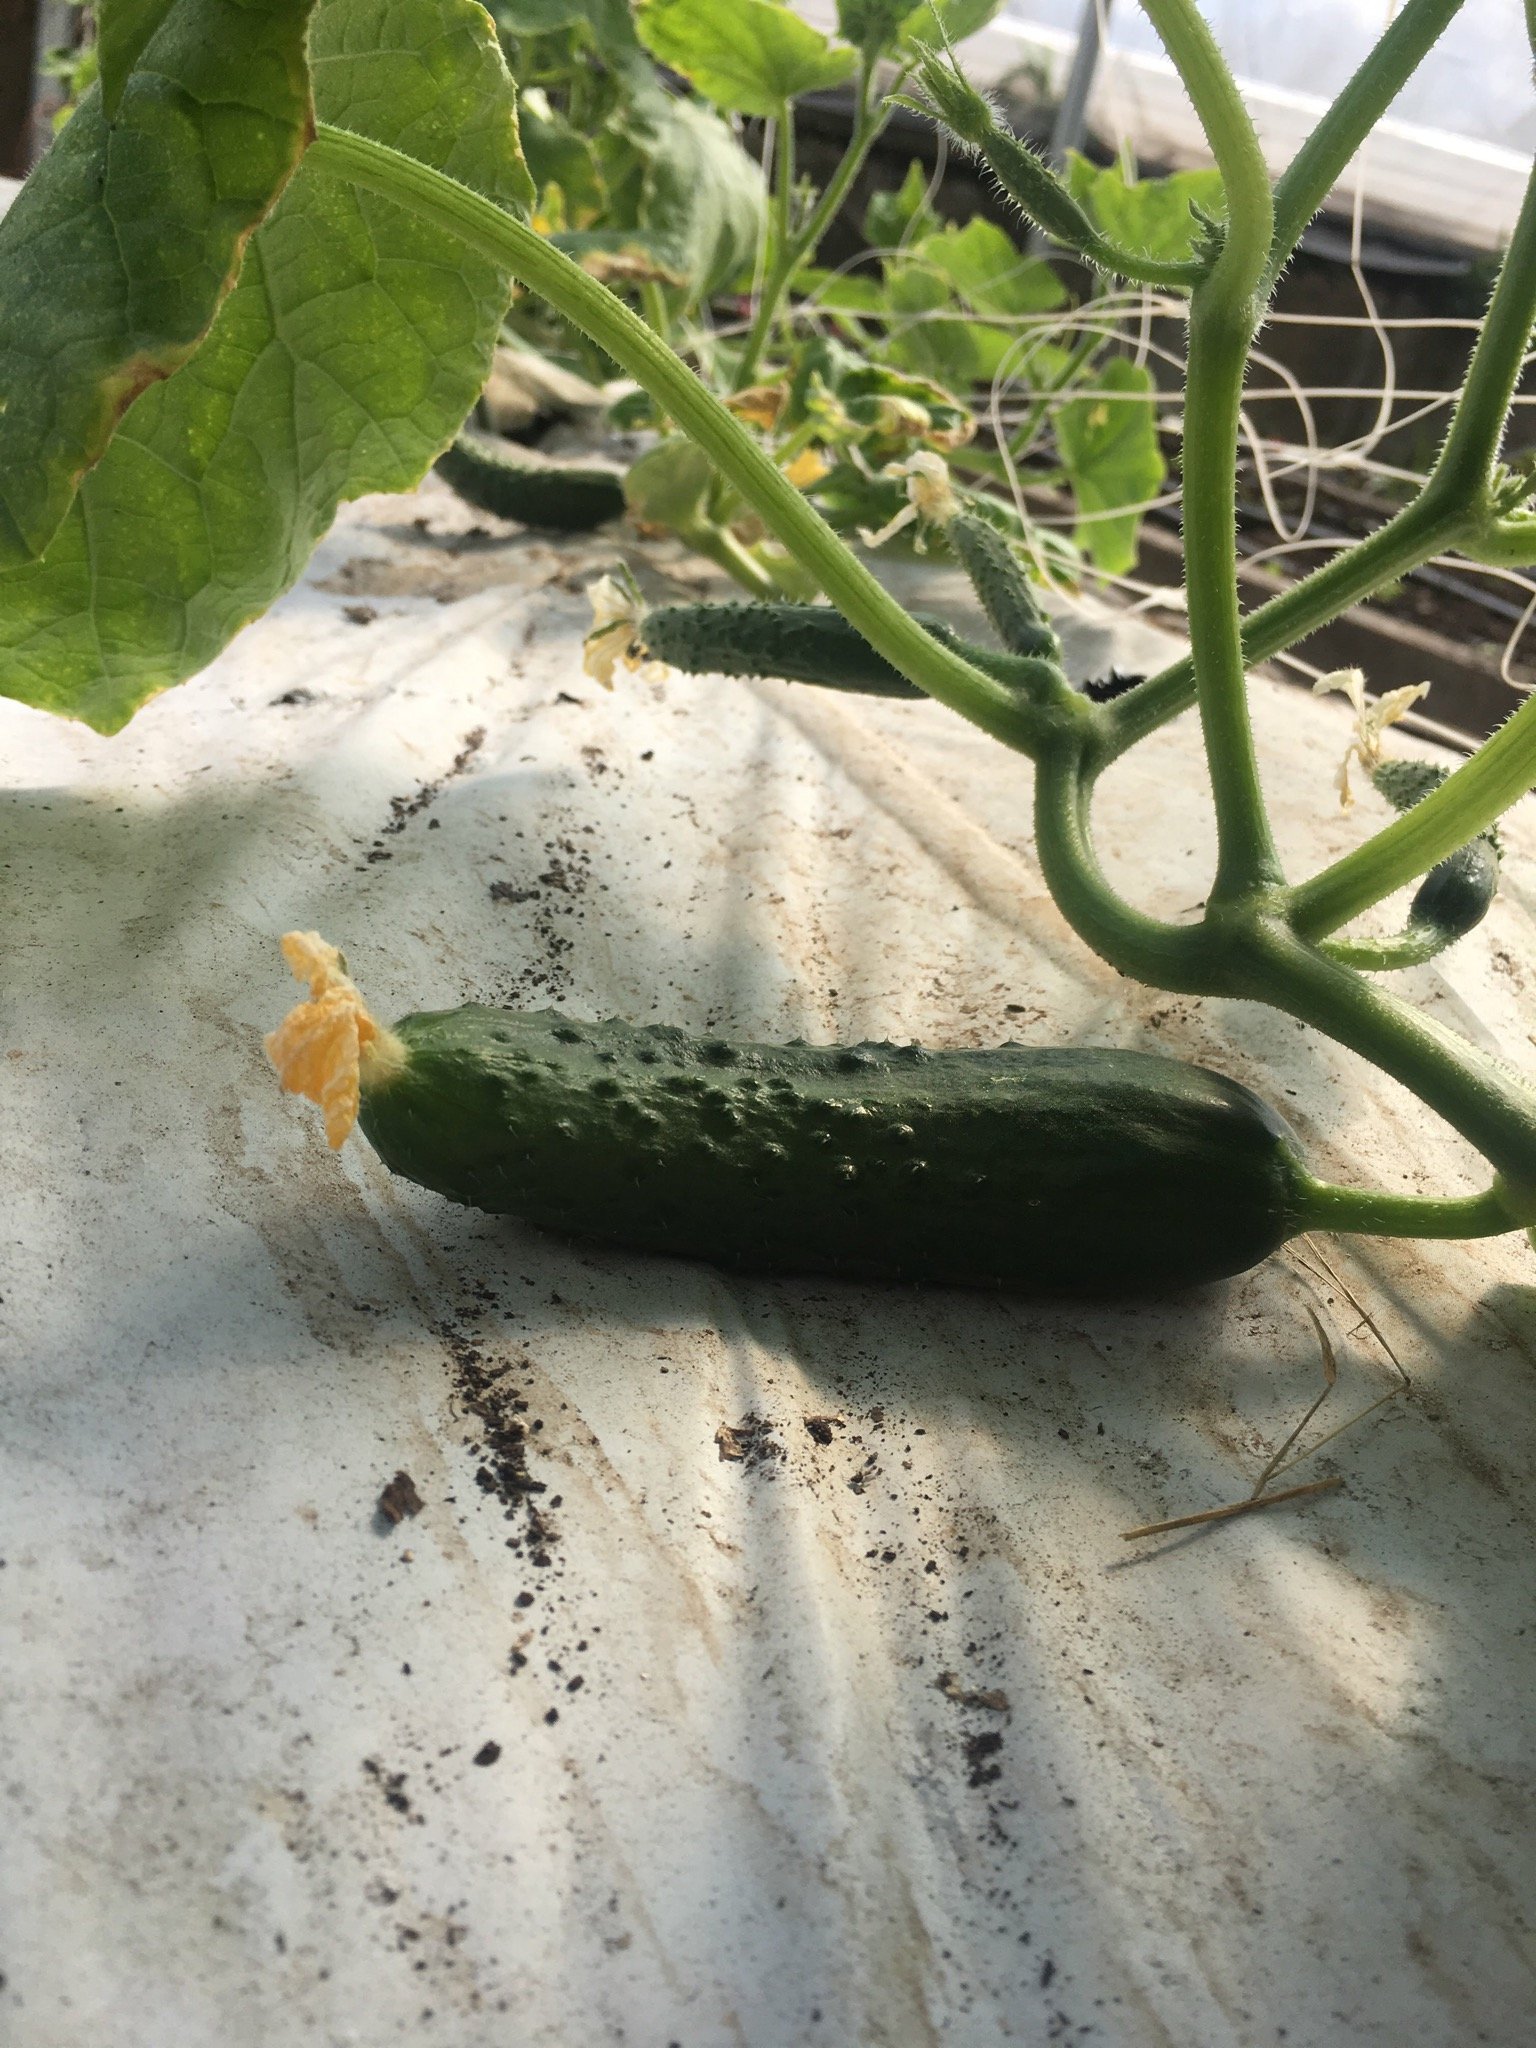 Next Happening: The Battle For The Cucumbers